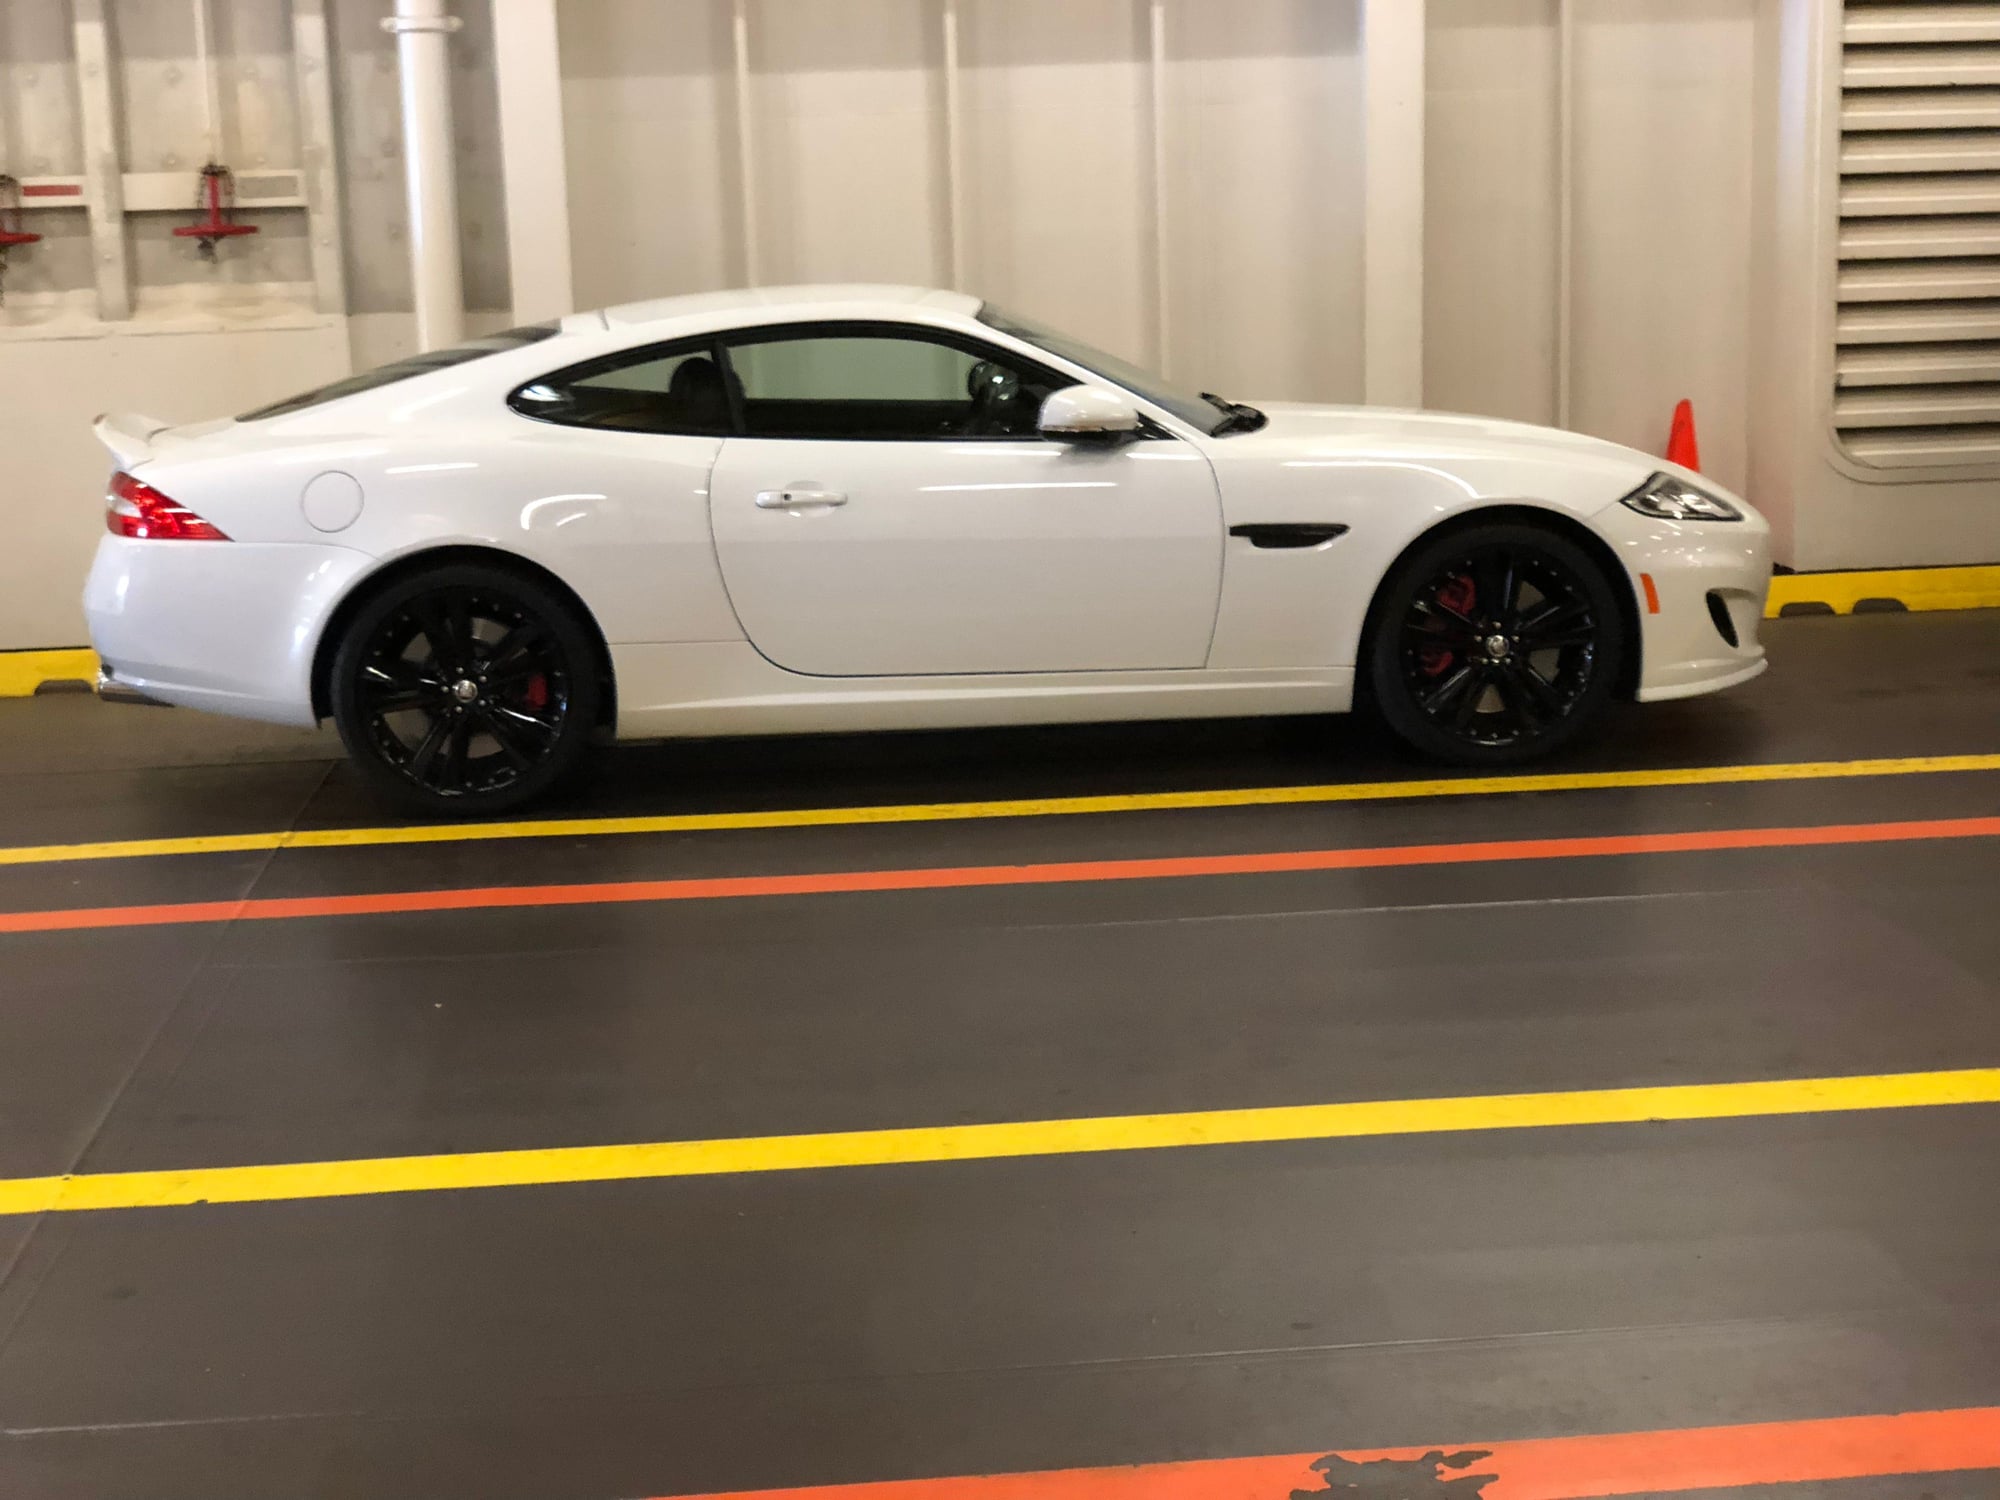 2013 Jaguar XKR - Mint 2013 XKR Canadian 16km only - Used - VIN SAJXA4DC0DMB50295 - 16,000 Miles - 8 cyl - 2WD - Automatic - Coupe - White - Victoria, BC V8W4A4, Canada